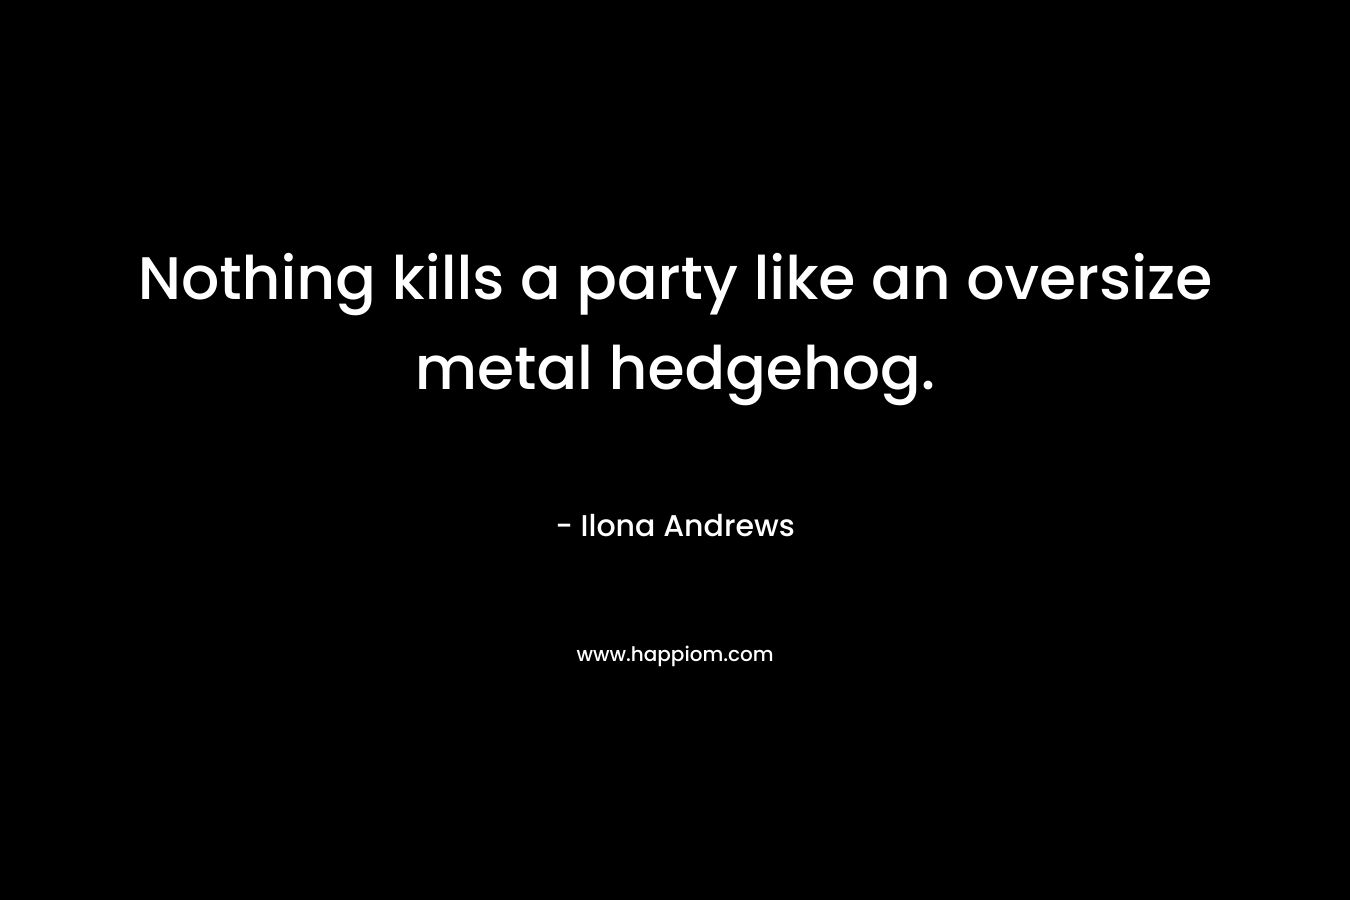 Nothing kills a party like an oversize metal hedgehog.